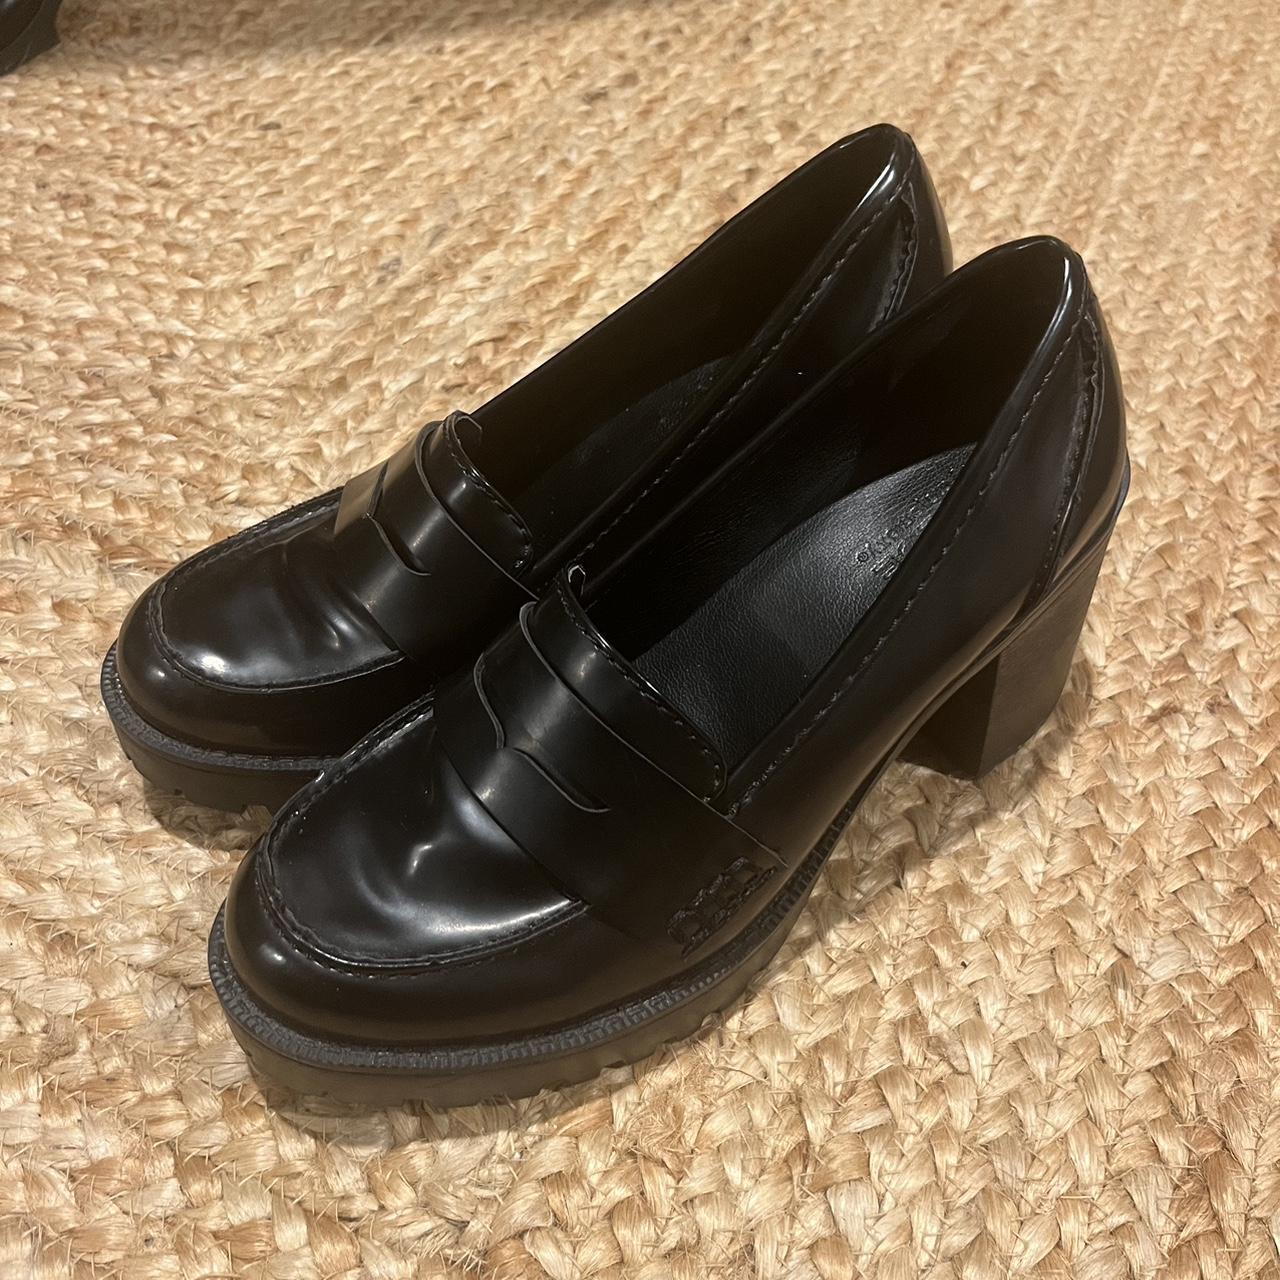 Loafer heals Great condition - Depop